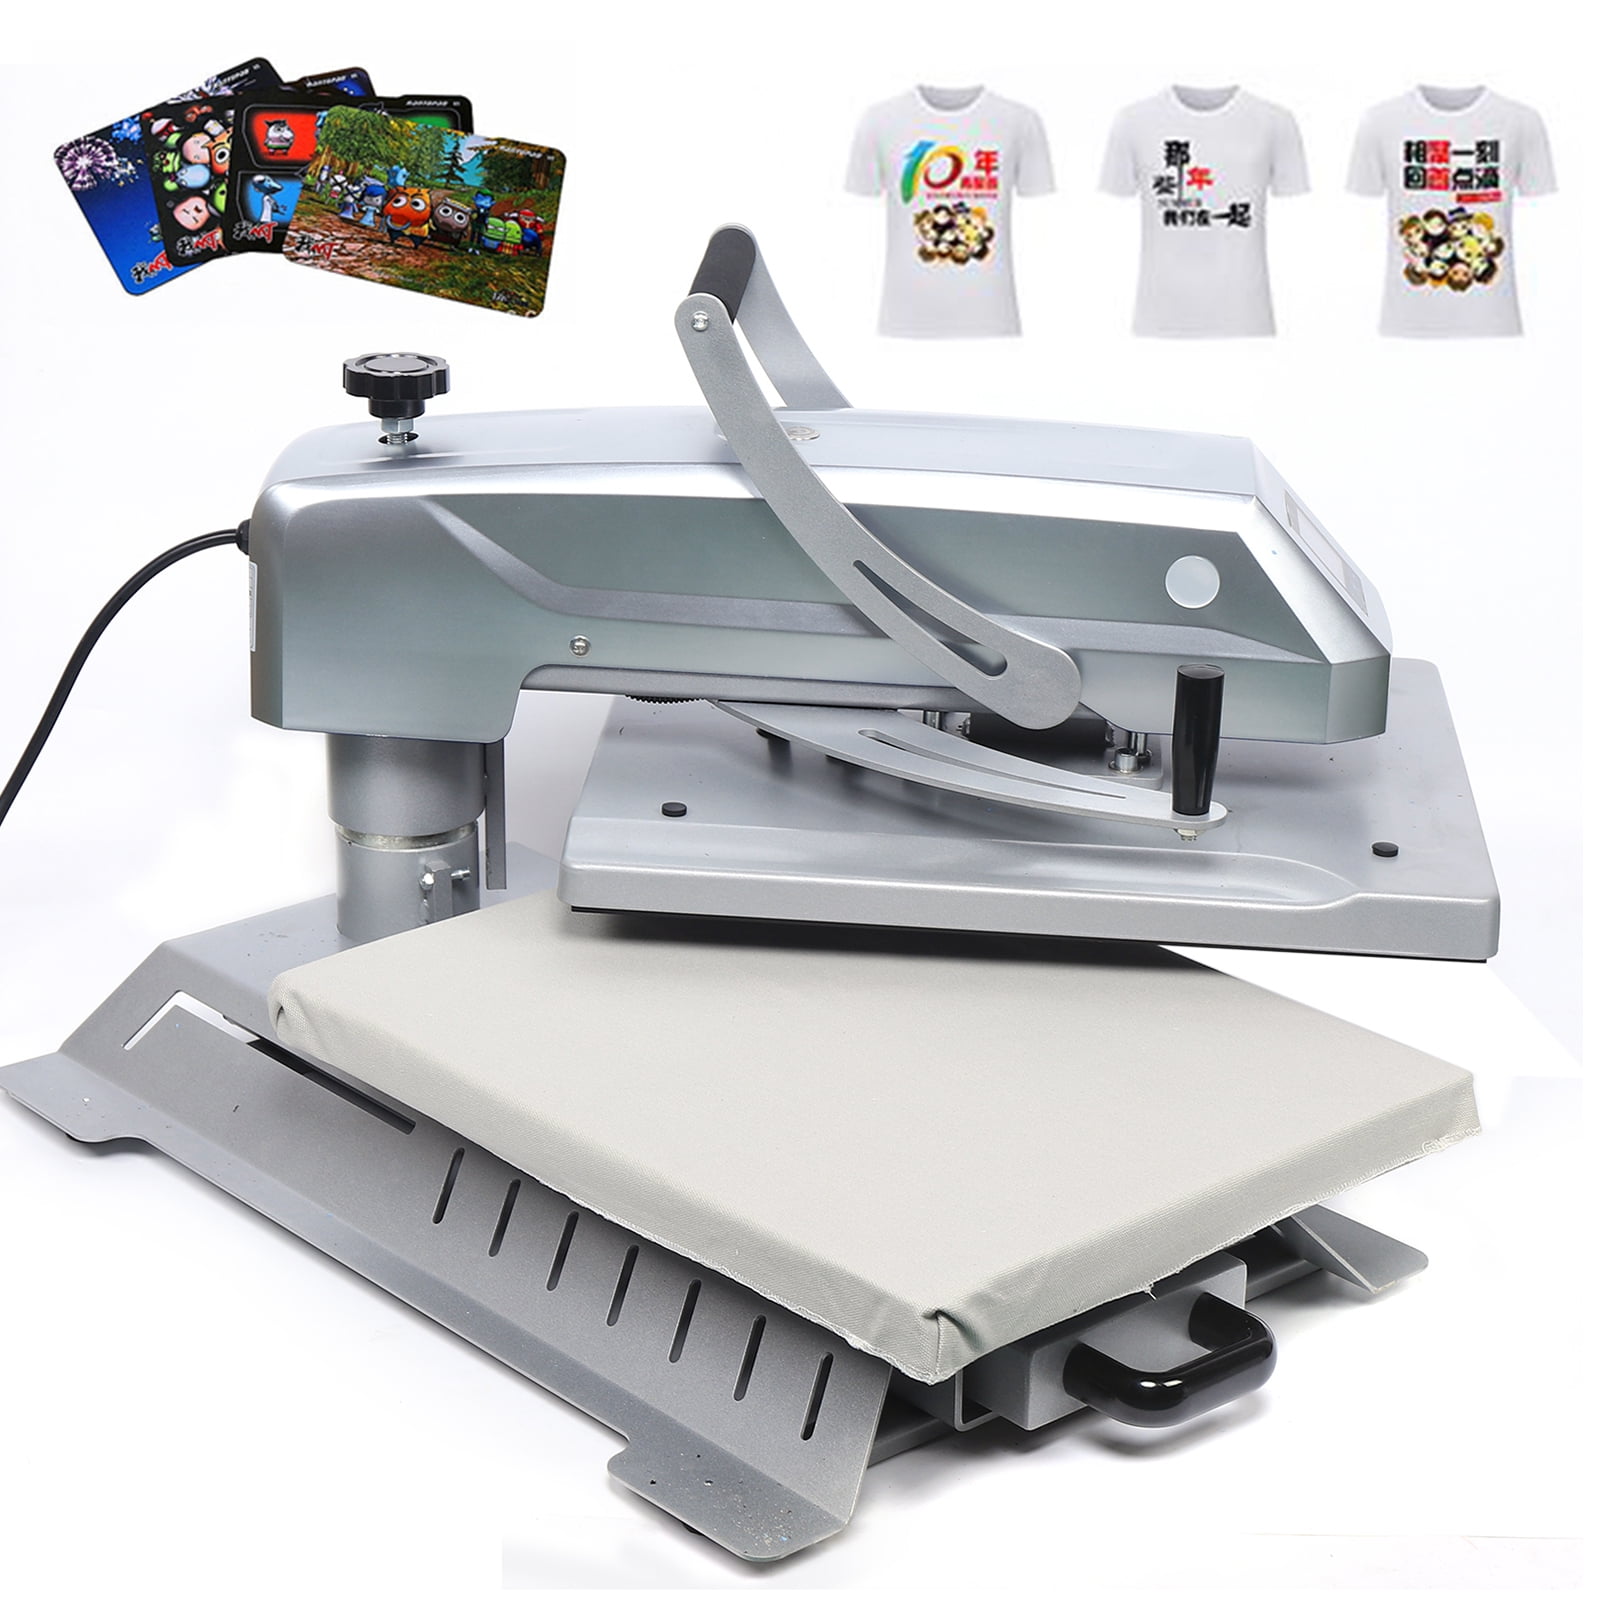  16x20 Inch Heat Press Machine, Manual Shaking Head T-Shirt Heat  Press Transfer Machine with Adjustable Pressure, Temperature and Time for  Home, Craft Store, Print Store, Photo Studio